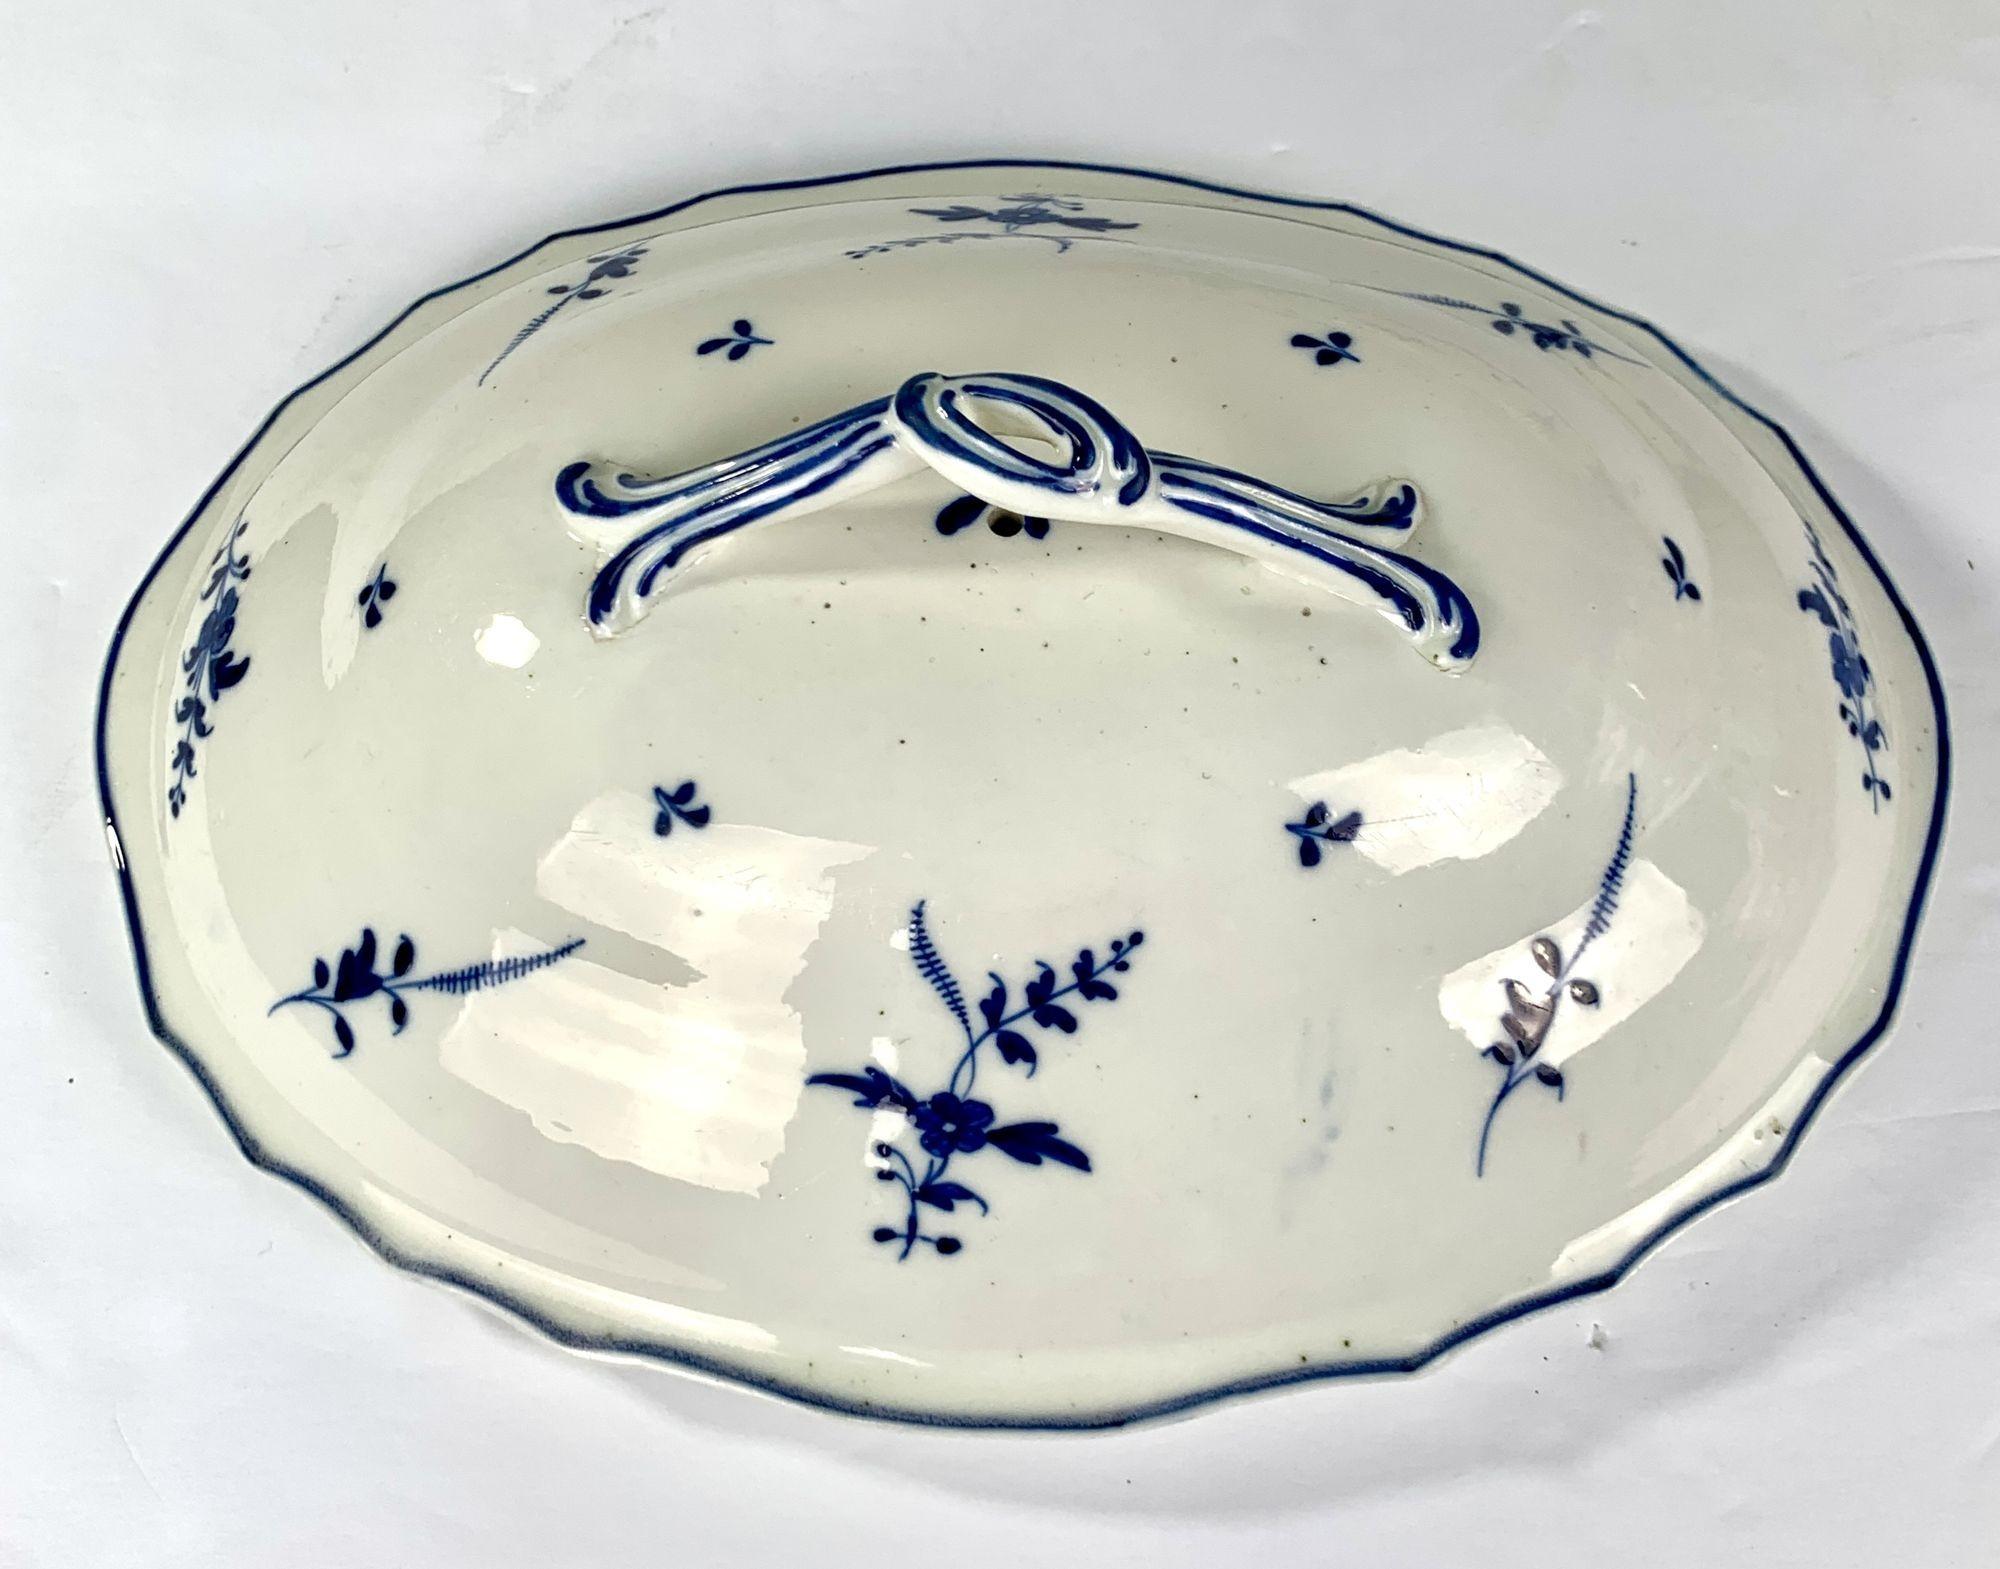   Decorated with an elegant design of delicate blue cornflower sprigs, this soup tureen was made by Arras Porcelain in Arras, France, in the late 18th century.
The cornflower sprigs, handles, and border edging are decorated with beautiful deep